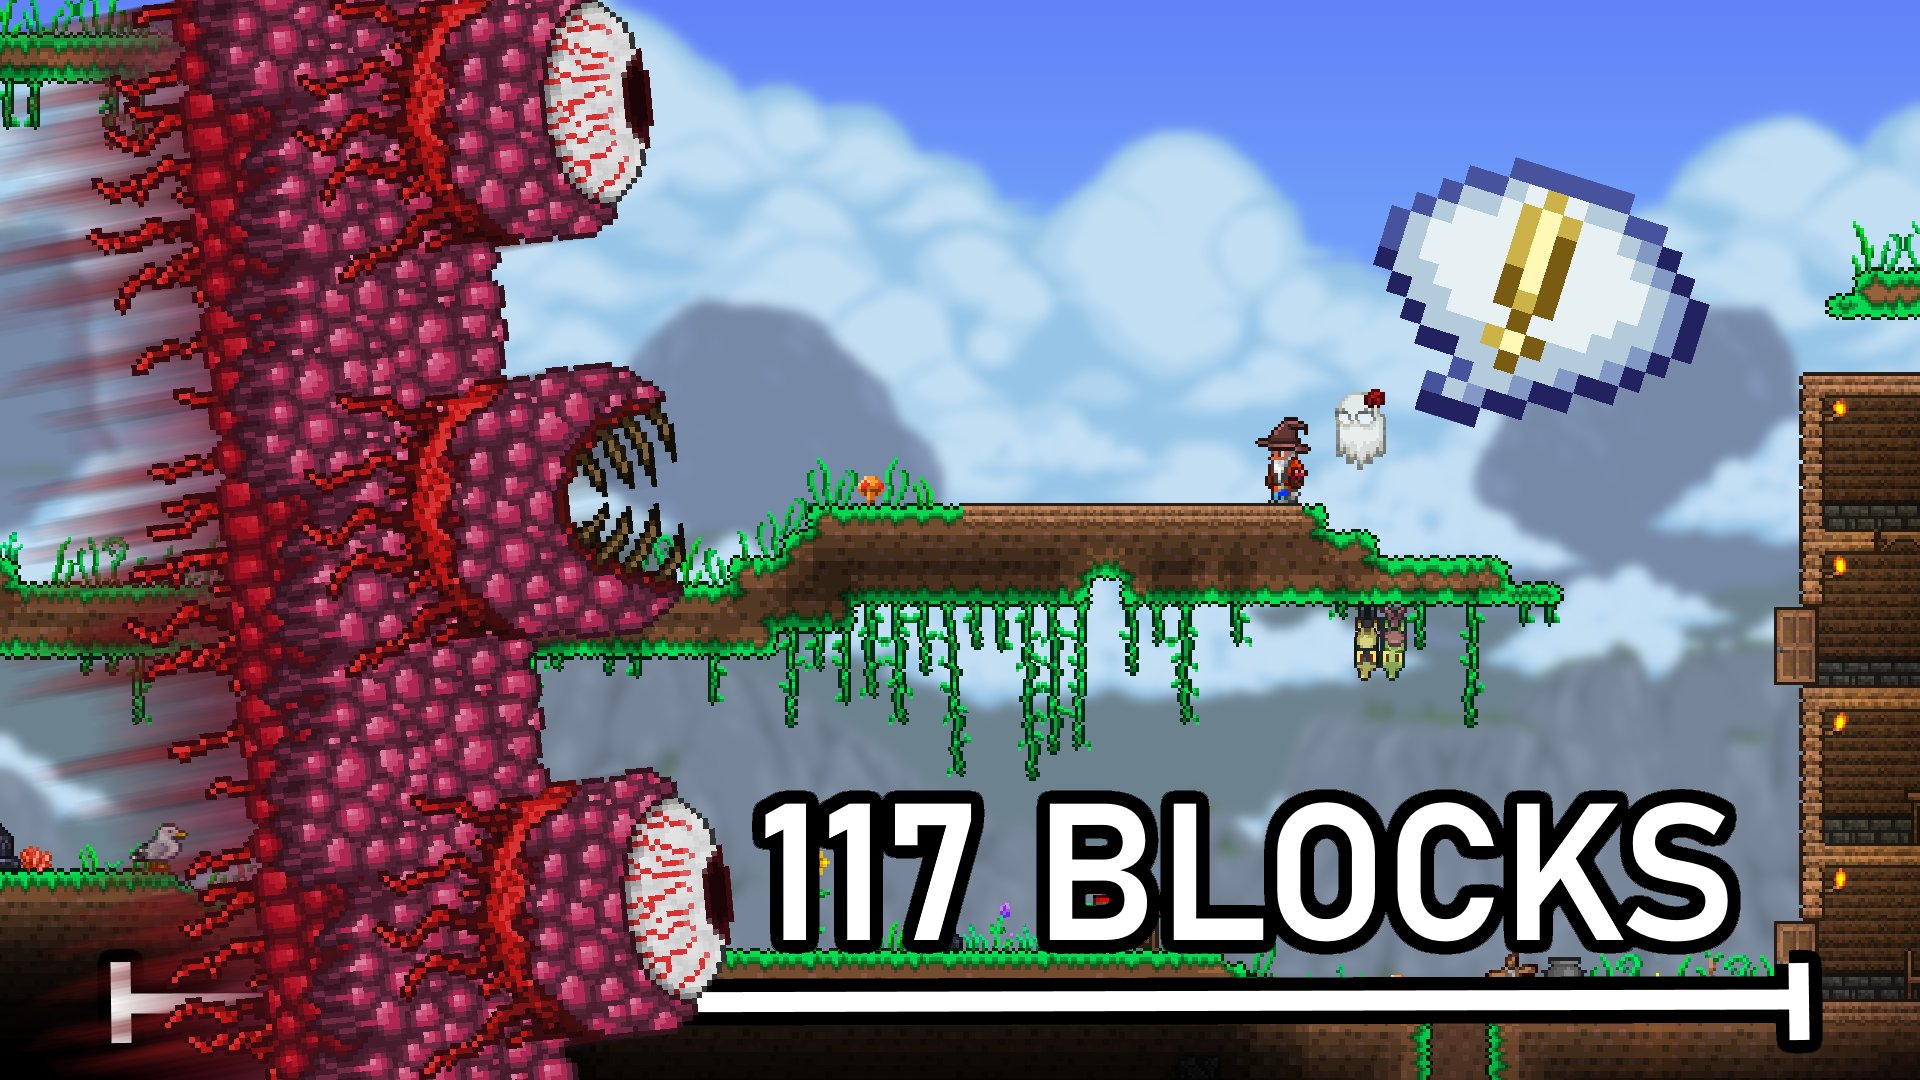 Terraria on Twitter: "RT @chippygamingyt: This might be my hardest Terraria challenge yet https://t.co/HcRm5hIcyR https://t.co/ttrNVMYgKA" / Twitter